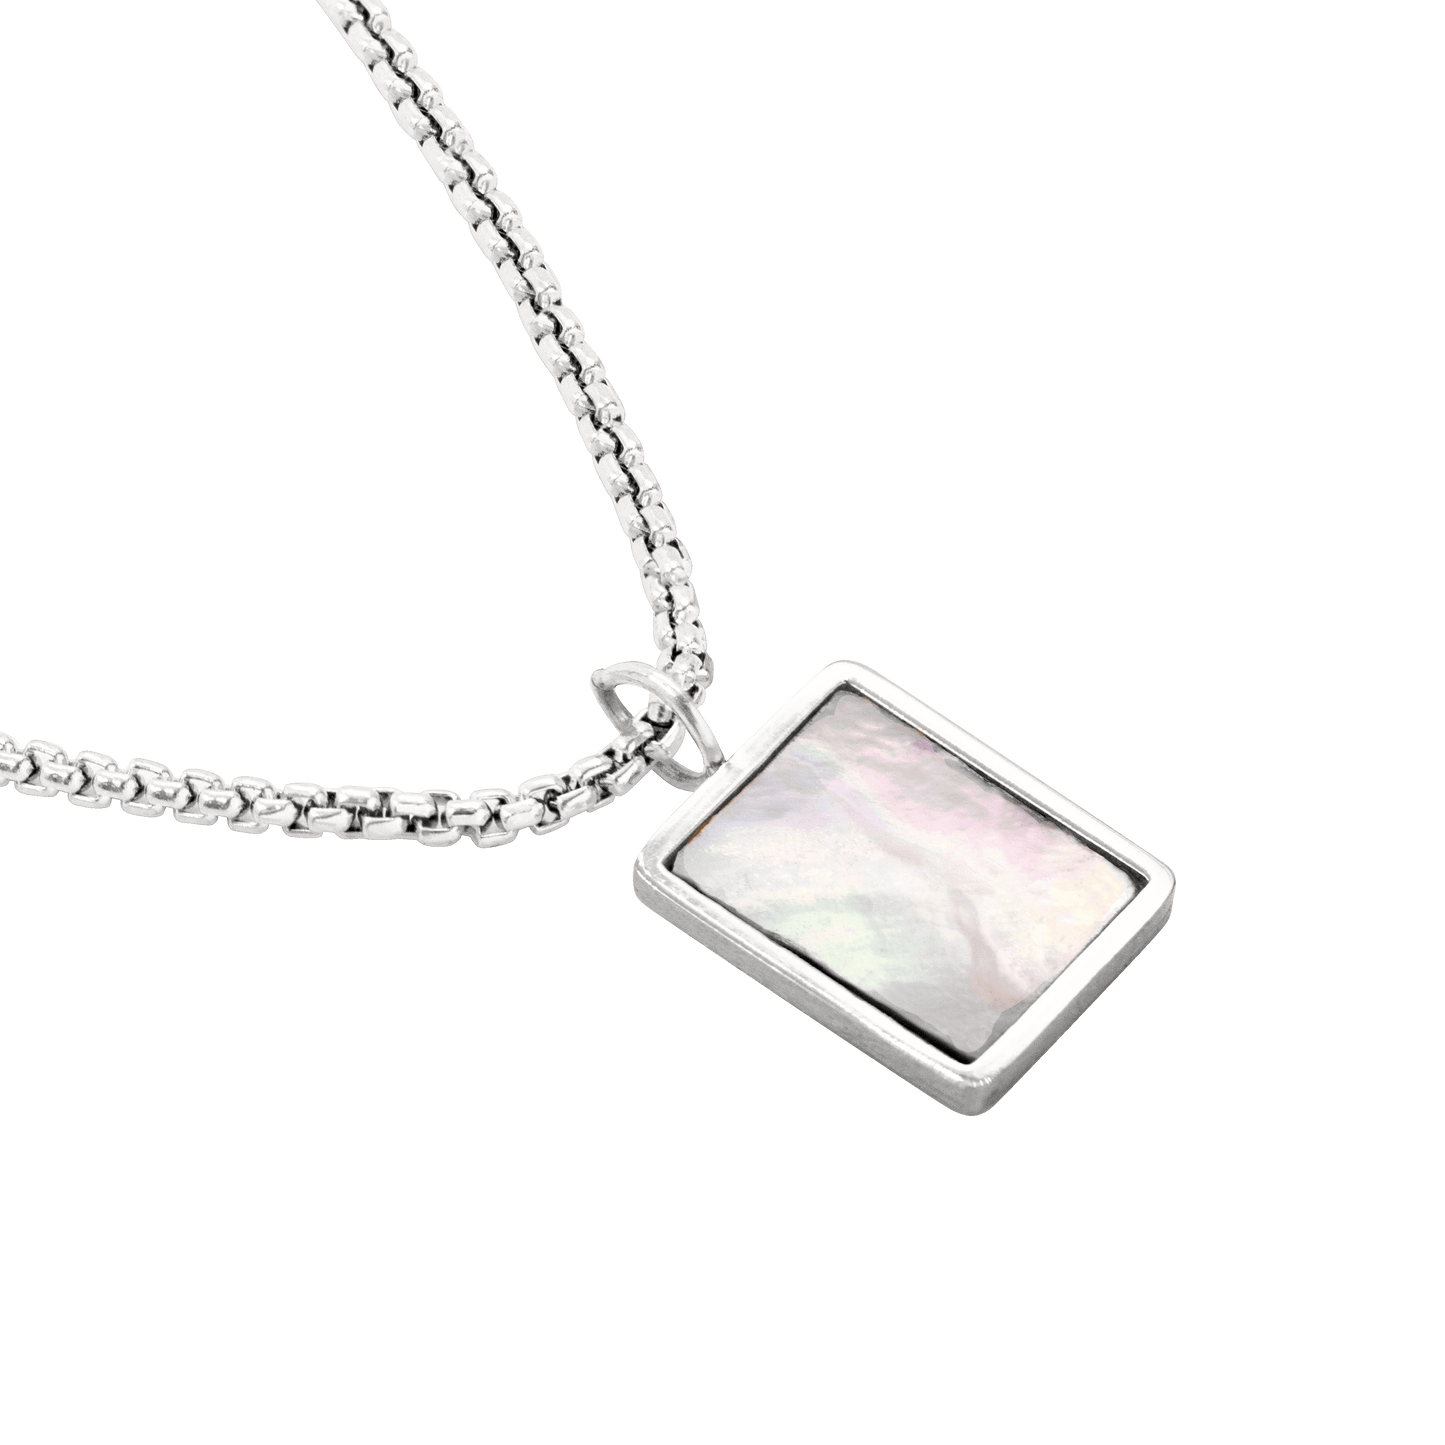 Shimmering Reflection Necklace Silver